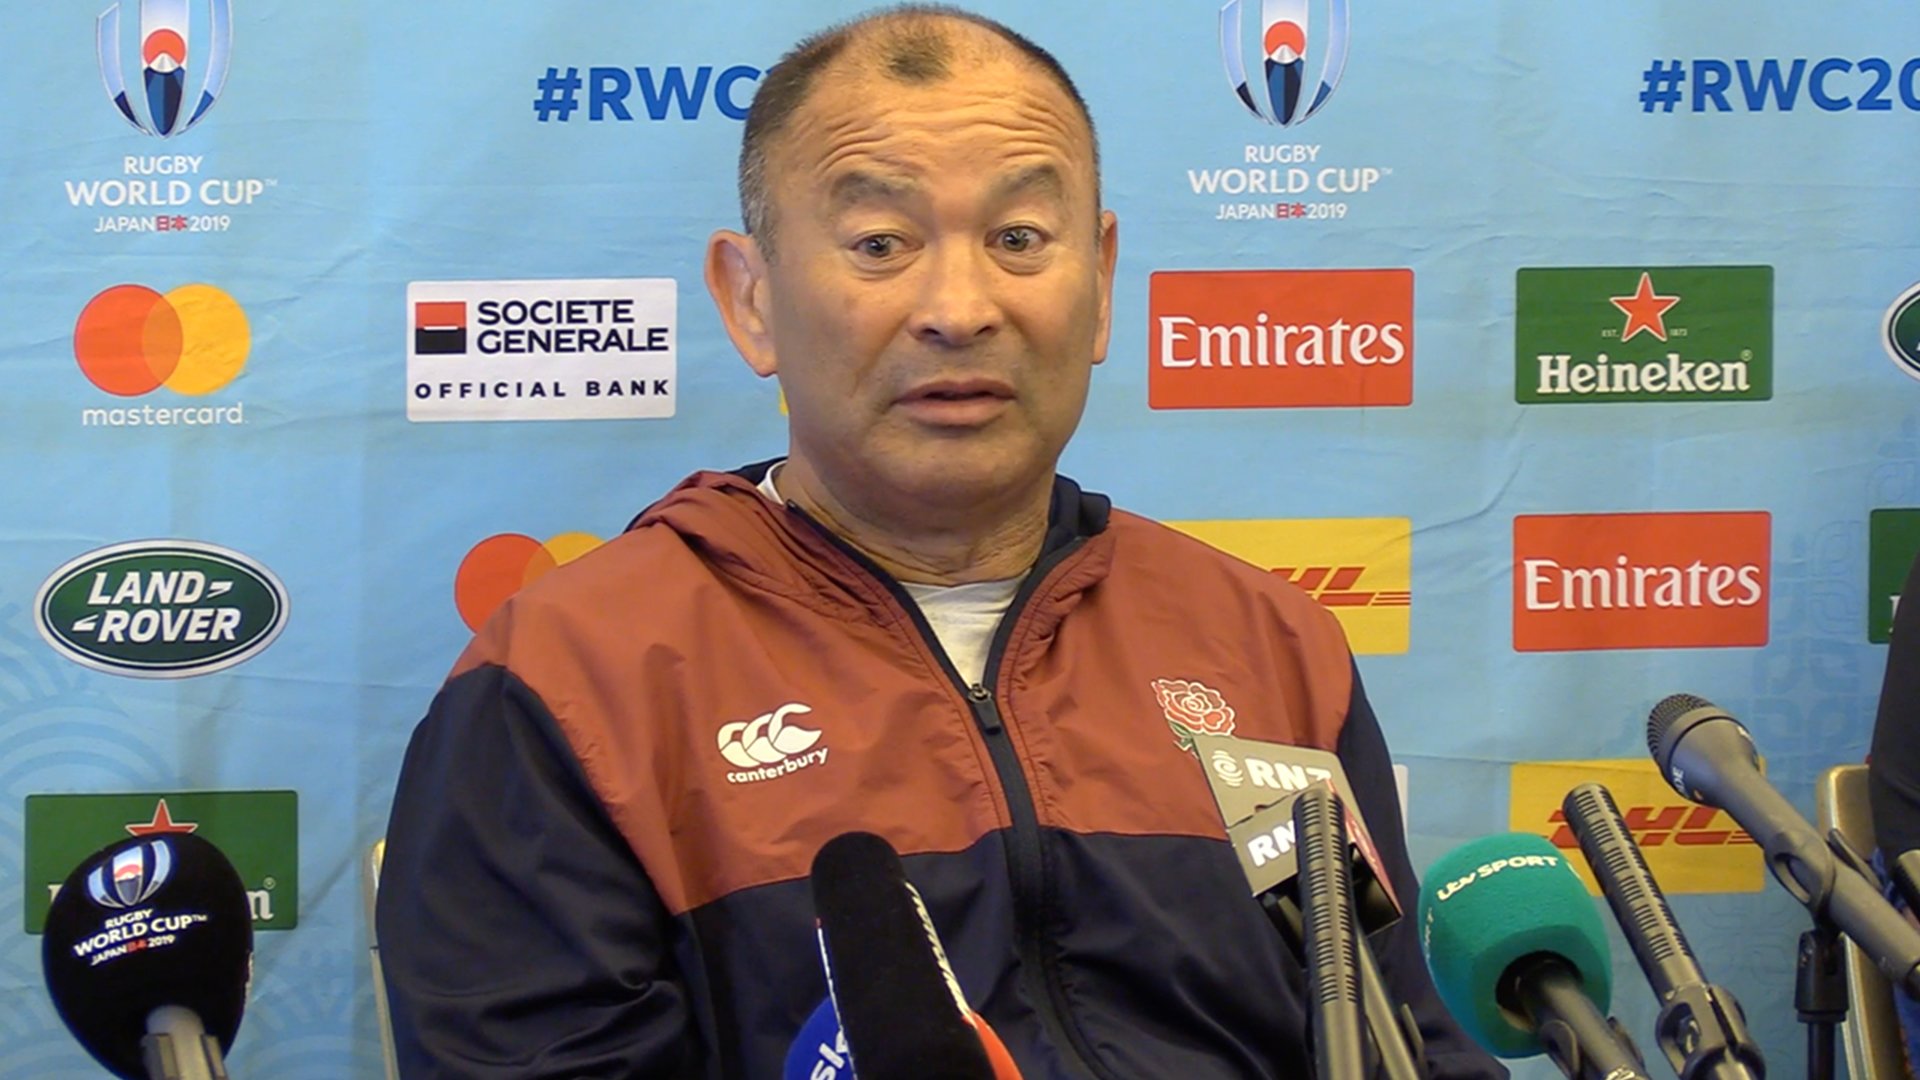 Eddie Jones claims England were spied on in training session